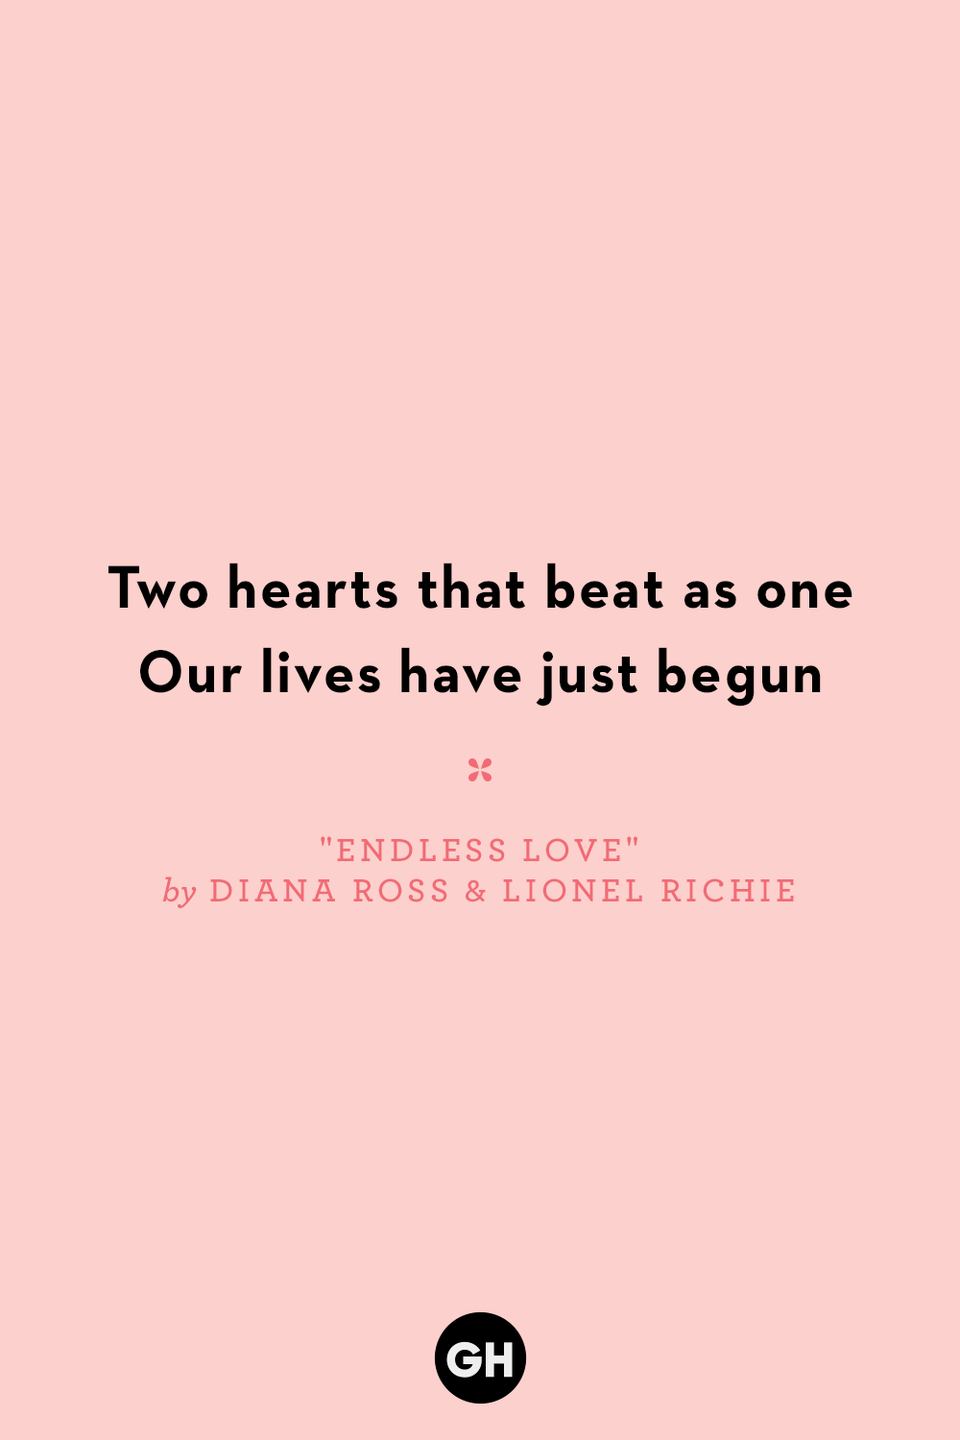 "Endless Love" Diana Ross & Lionel Richie